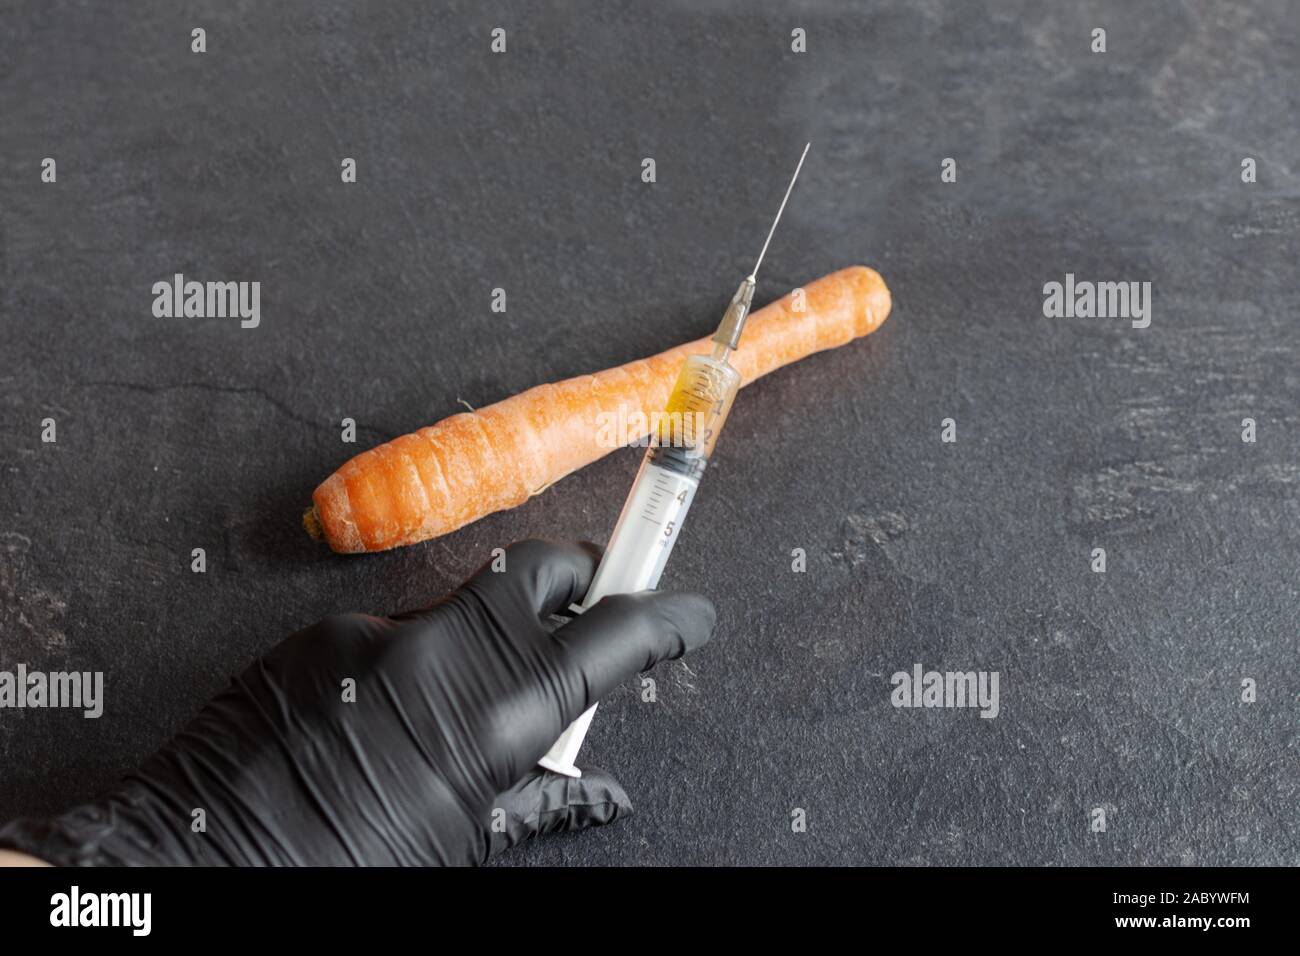 Hand of person injects chemicals into carrots, GMO fertilizers and chemicals with a syringe to increase the shelf life of vegetables. Chemical process Stock Photo